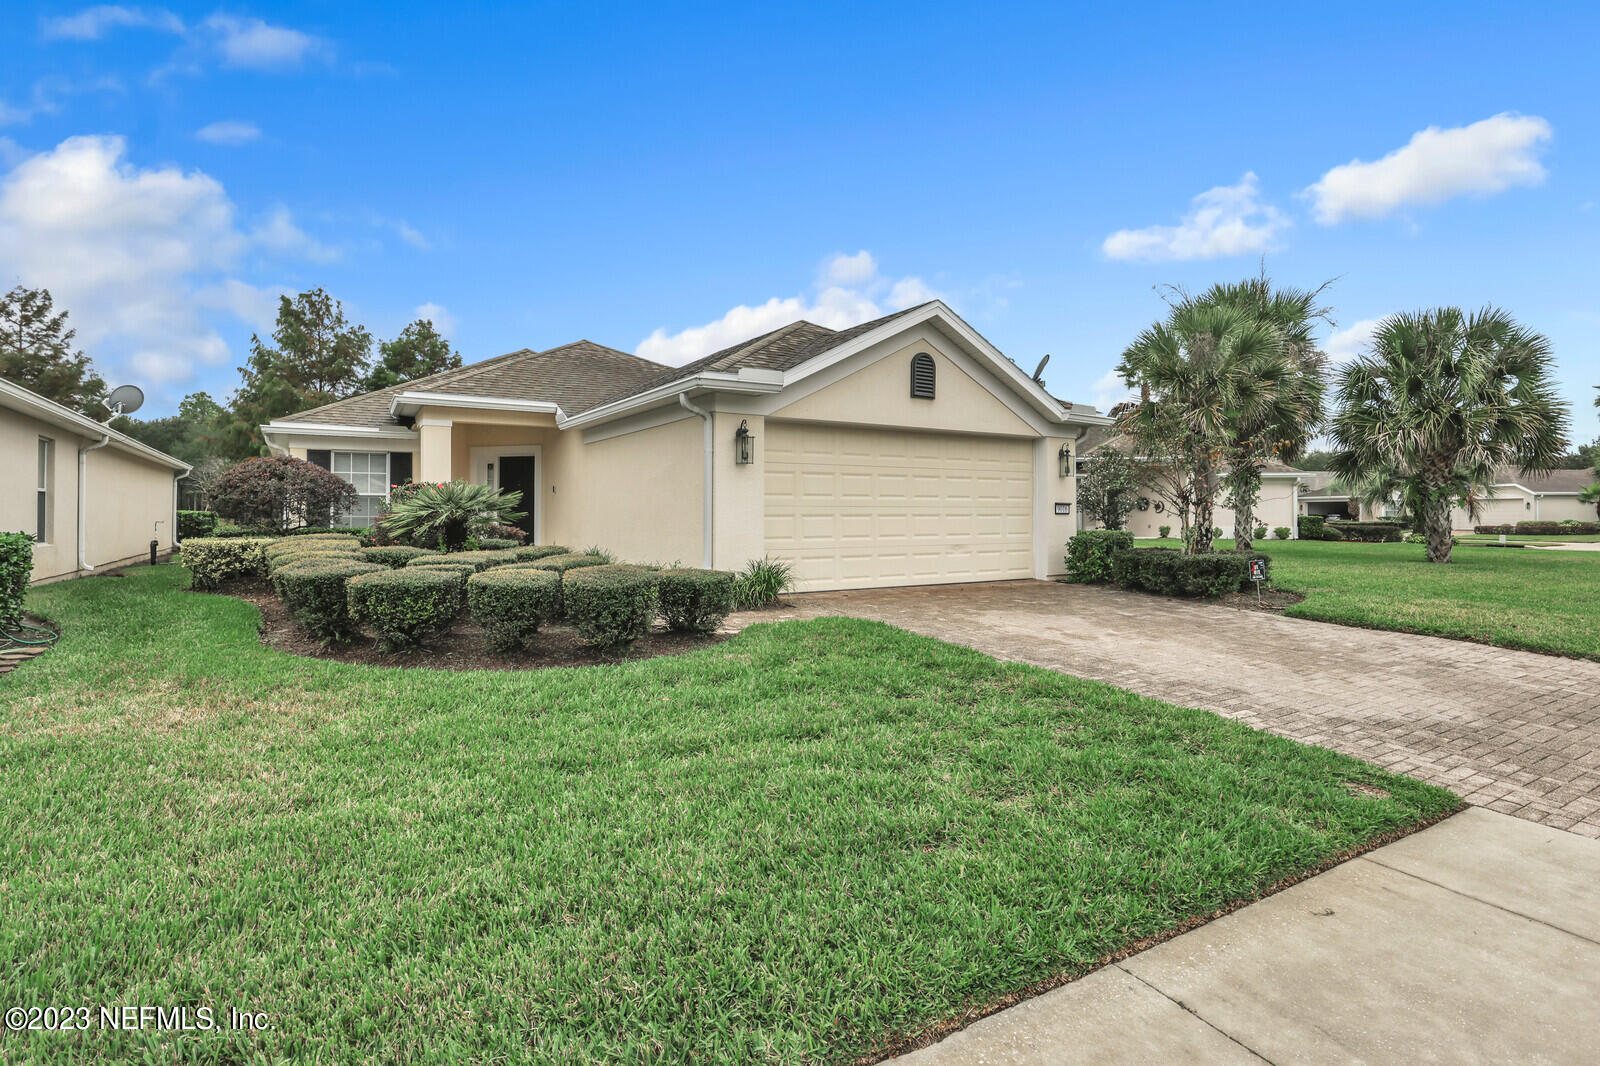 Jacksonville, FL home for sale located at 9016 Tropical Bend Circle, Jacksonville, FL 32256